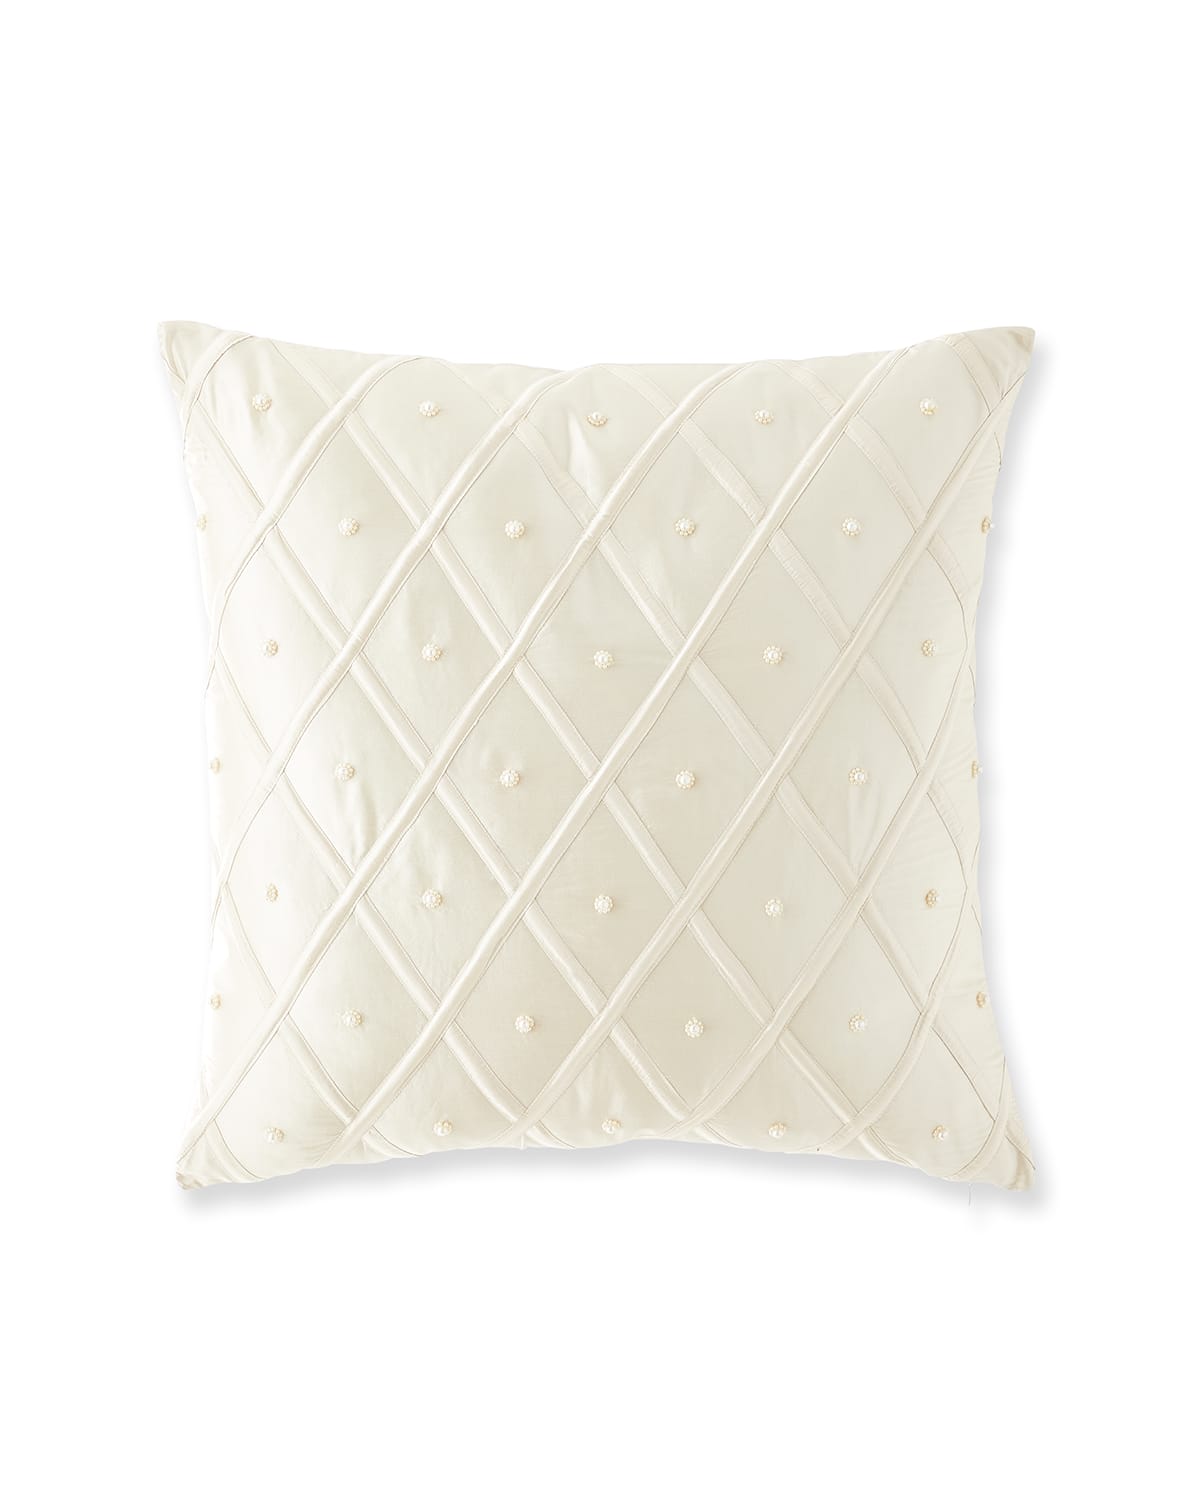 Austin Horn Collection Catherine's Palace Pearl Lattice Euro Sham In Neutral